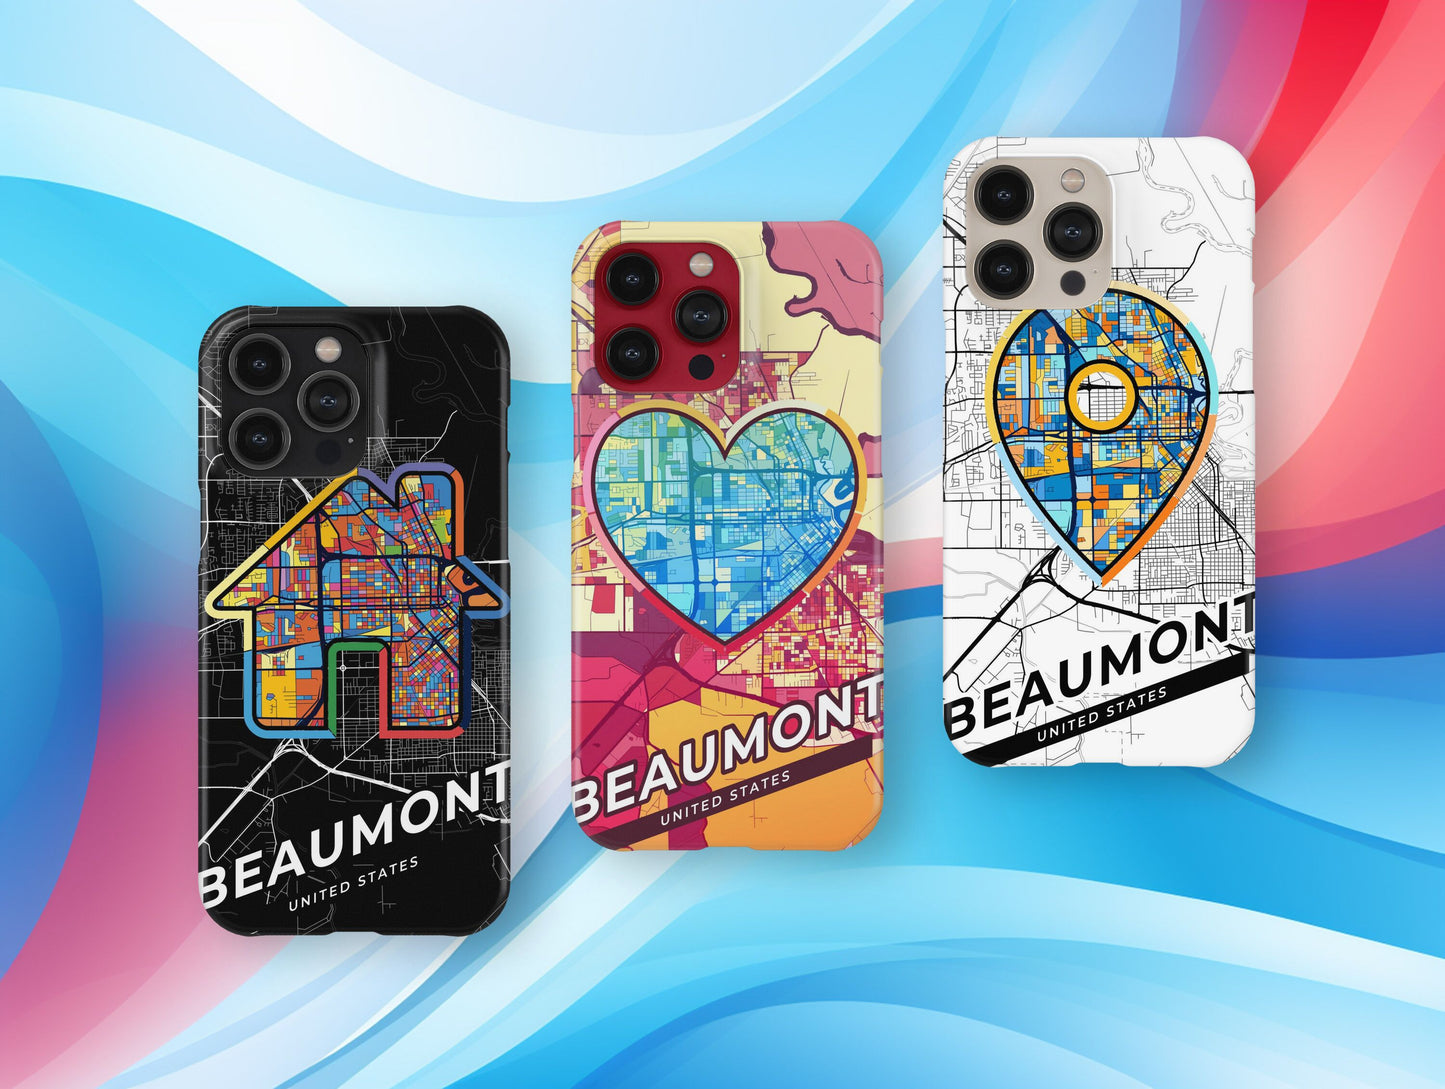 Beaumont Texas slim phone case with colorful icon. Birthday, wedding or housewarming gift. Couple match cases.